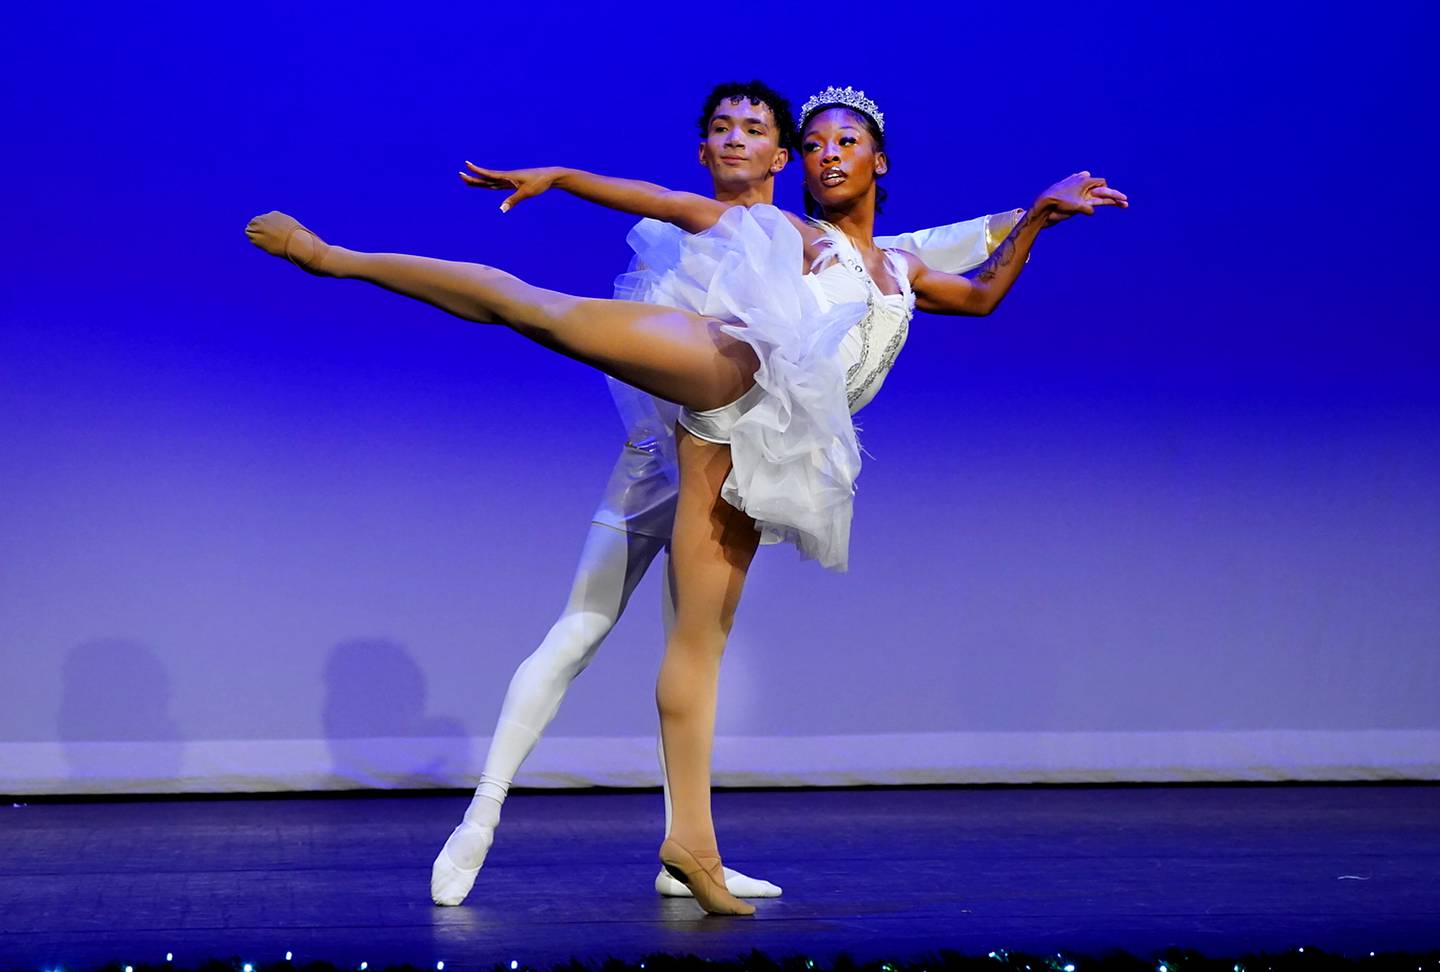 Photos are from Morton Street Dance Center's performance of The Nutcracker, cast--particularly cast members of color who are in lead positions. The Snow Queen and The Nutcracker should be highlighted.  (The Prince) Armani Réy Colón Dances with (Snow Queen) NaTori Blackman-Gray.